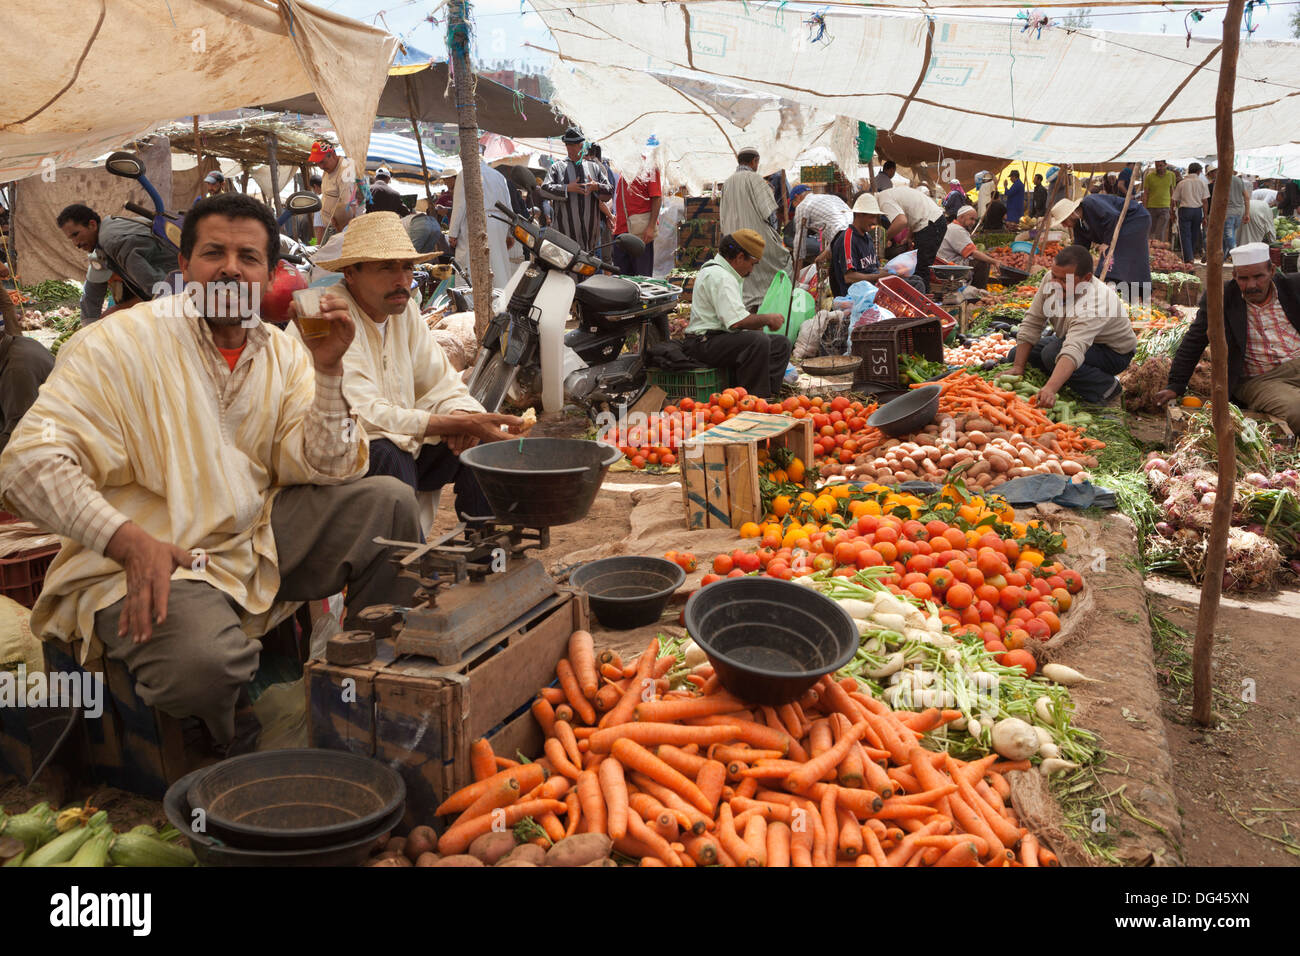 Monday Berber market, Tnine Ourika, Ourika Valley, Atlas Mountains, Morocco, North Africa, Africa Stock Photo